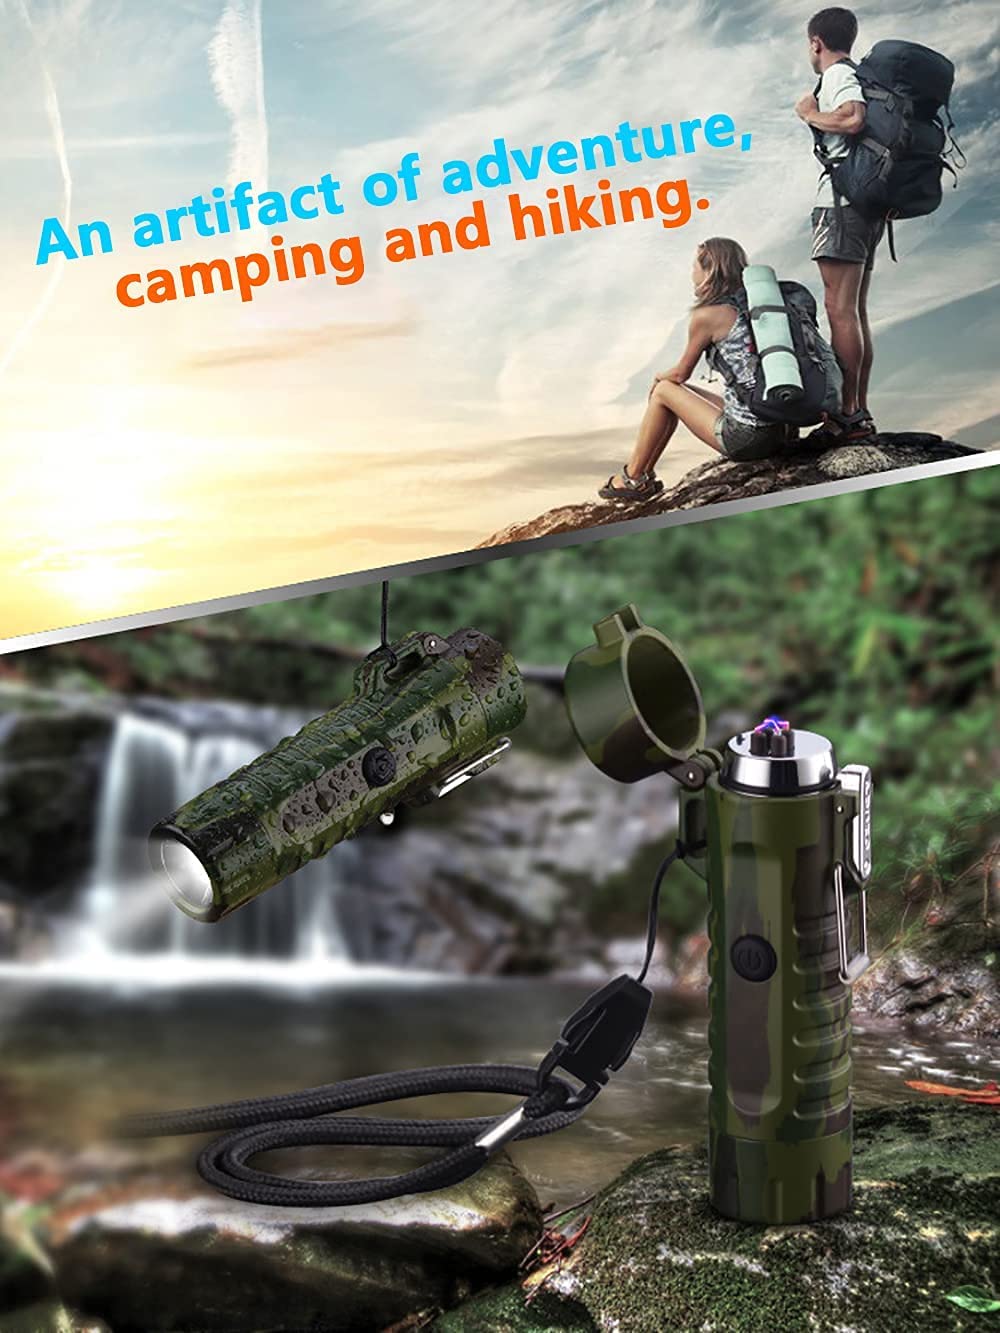 Waterproof Rechargeable LED Camping Lantern Flashing 3-in-1 Portable  Compact Camping Gear Mosquito Camp Lamp Emergency LED Camping Light - China  Camping Light, Tent Light